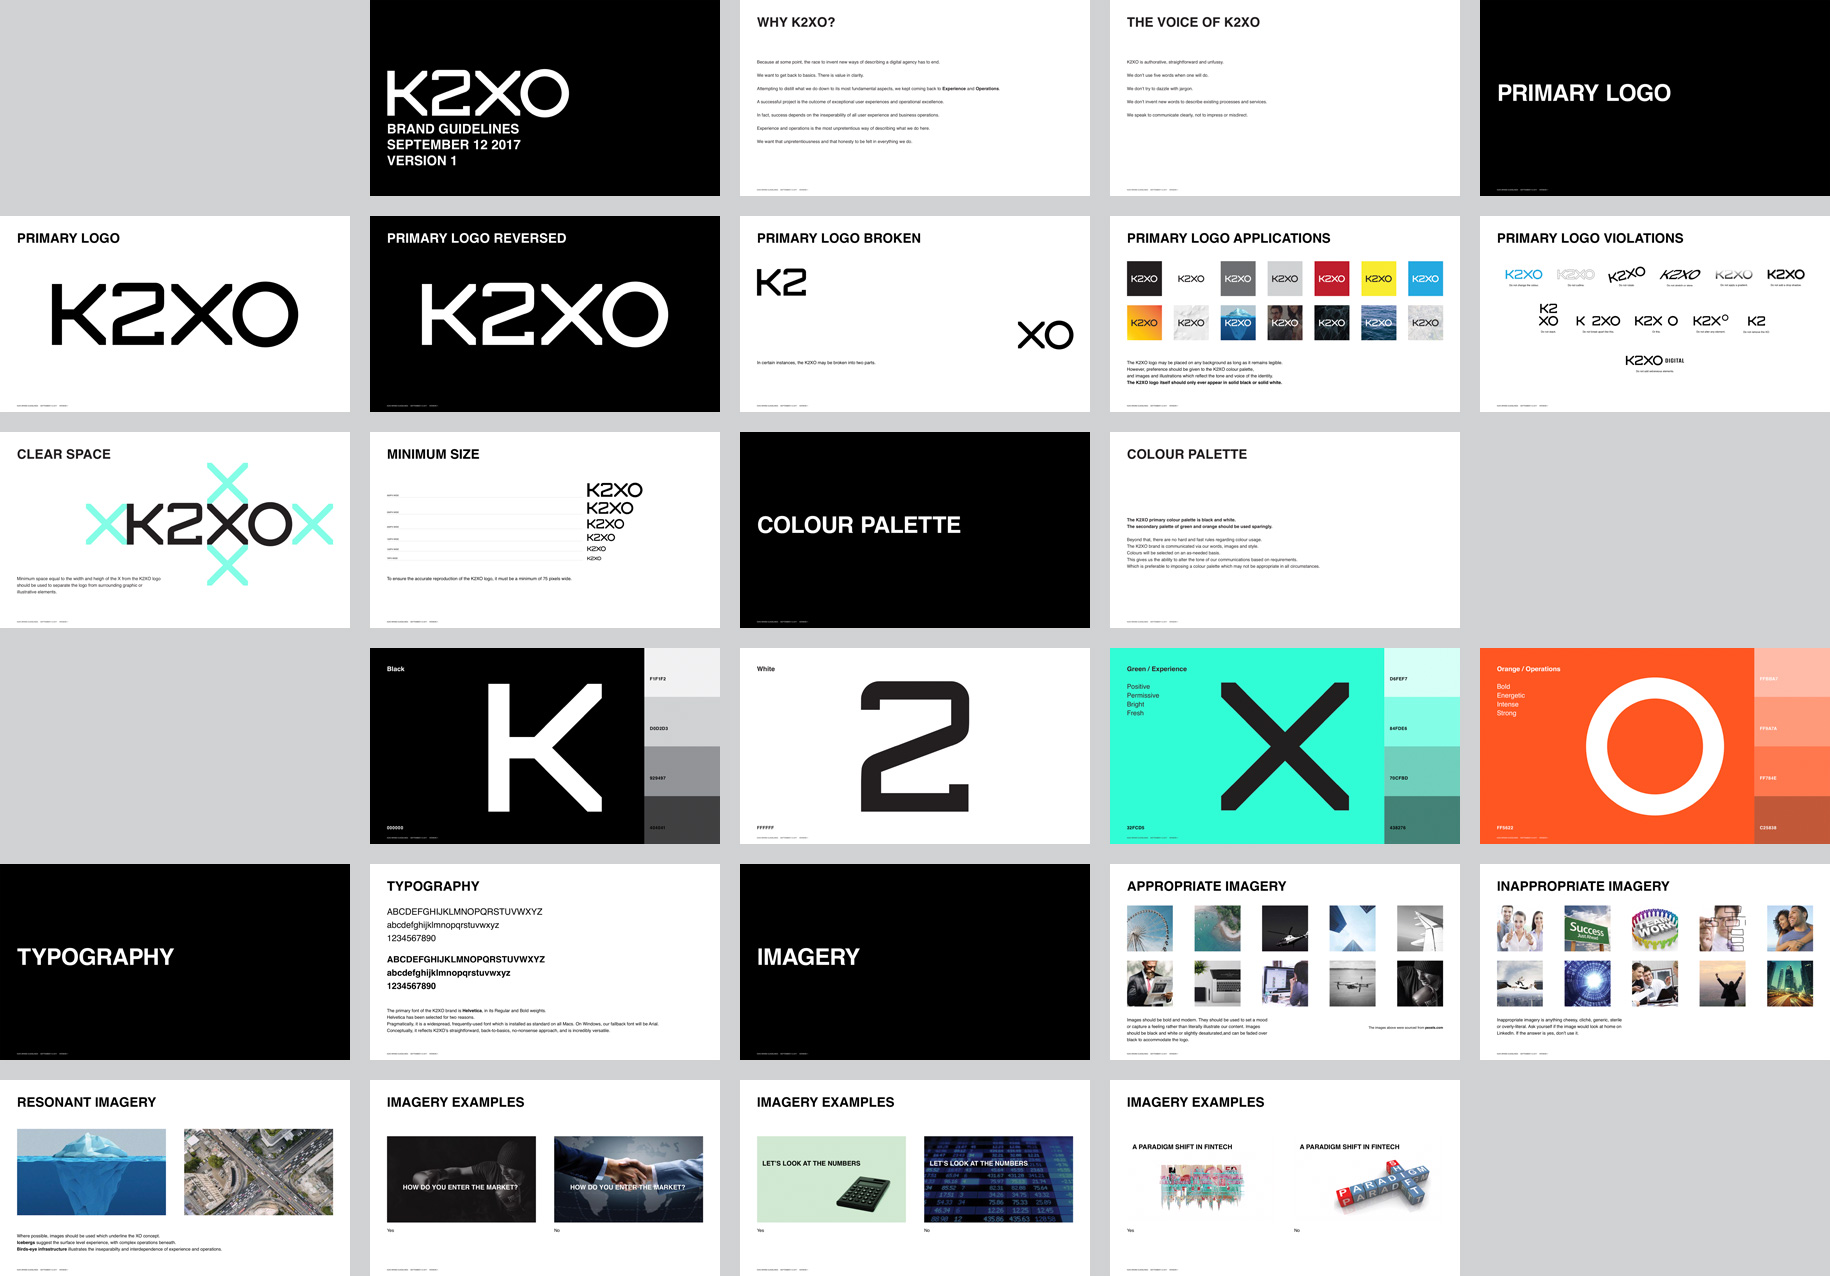 Image showing various pages of the K2XO brand guidelines document